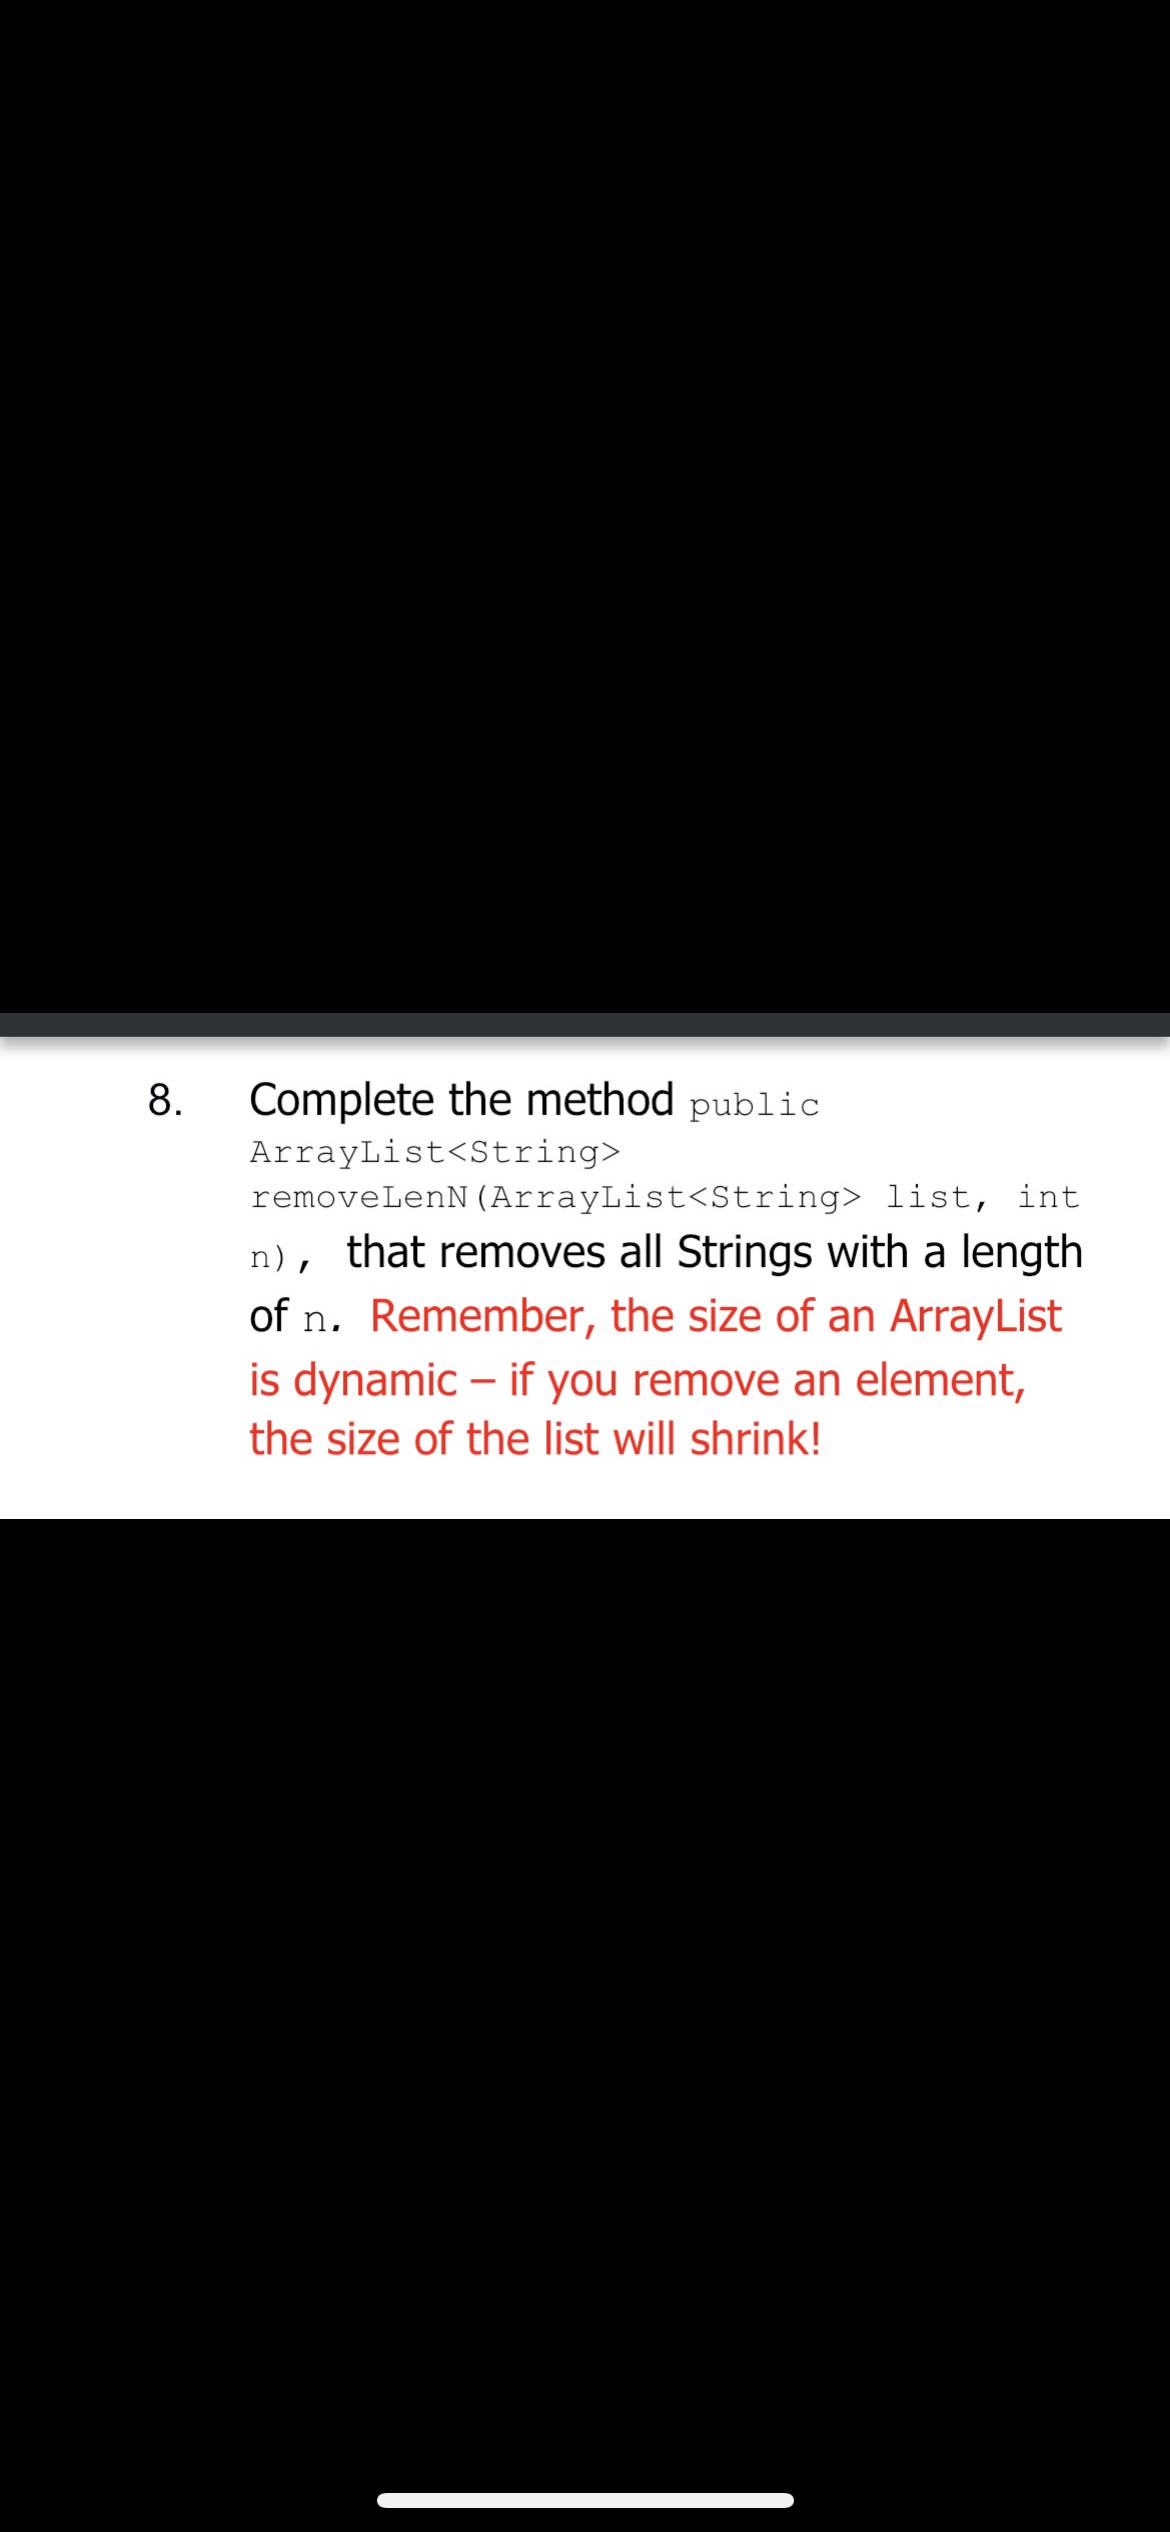 8.
Complete the method public
ArrayList<String>
removeLenN (ArrayList<String> list, int
n), that removes all Strings with a length
of n. Remember, the size of an ArrayList
is dynamic - if you remove an element,
the size of the list will shrink!